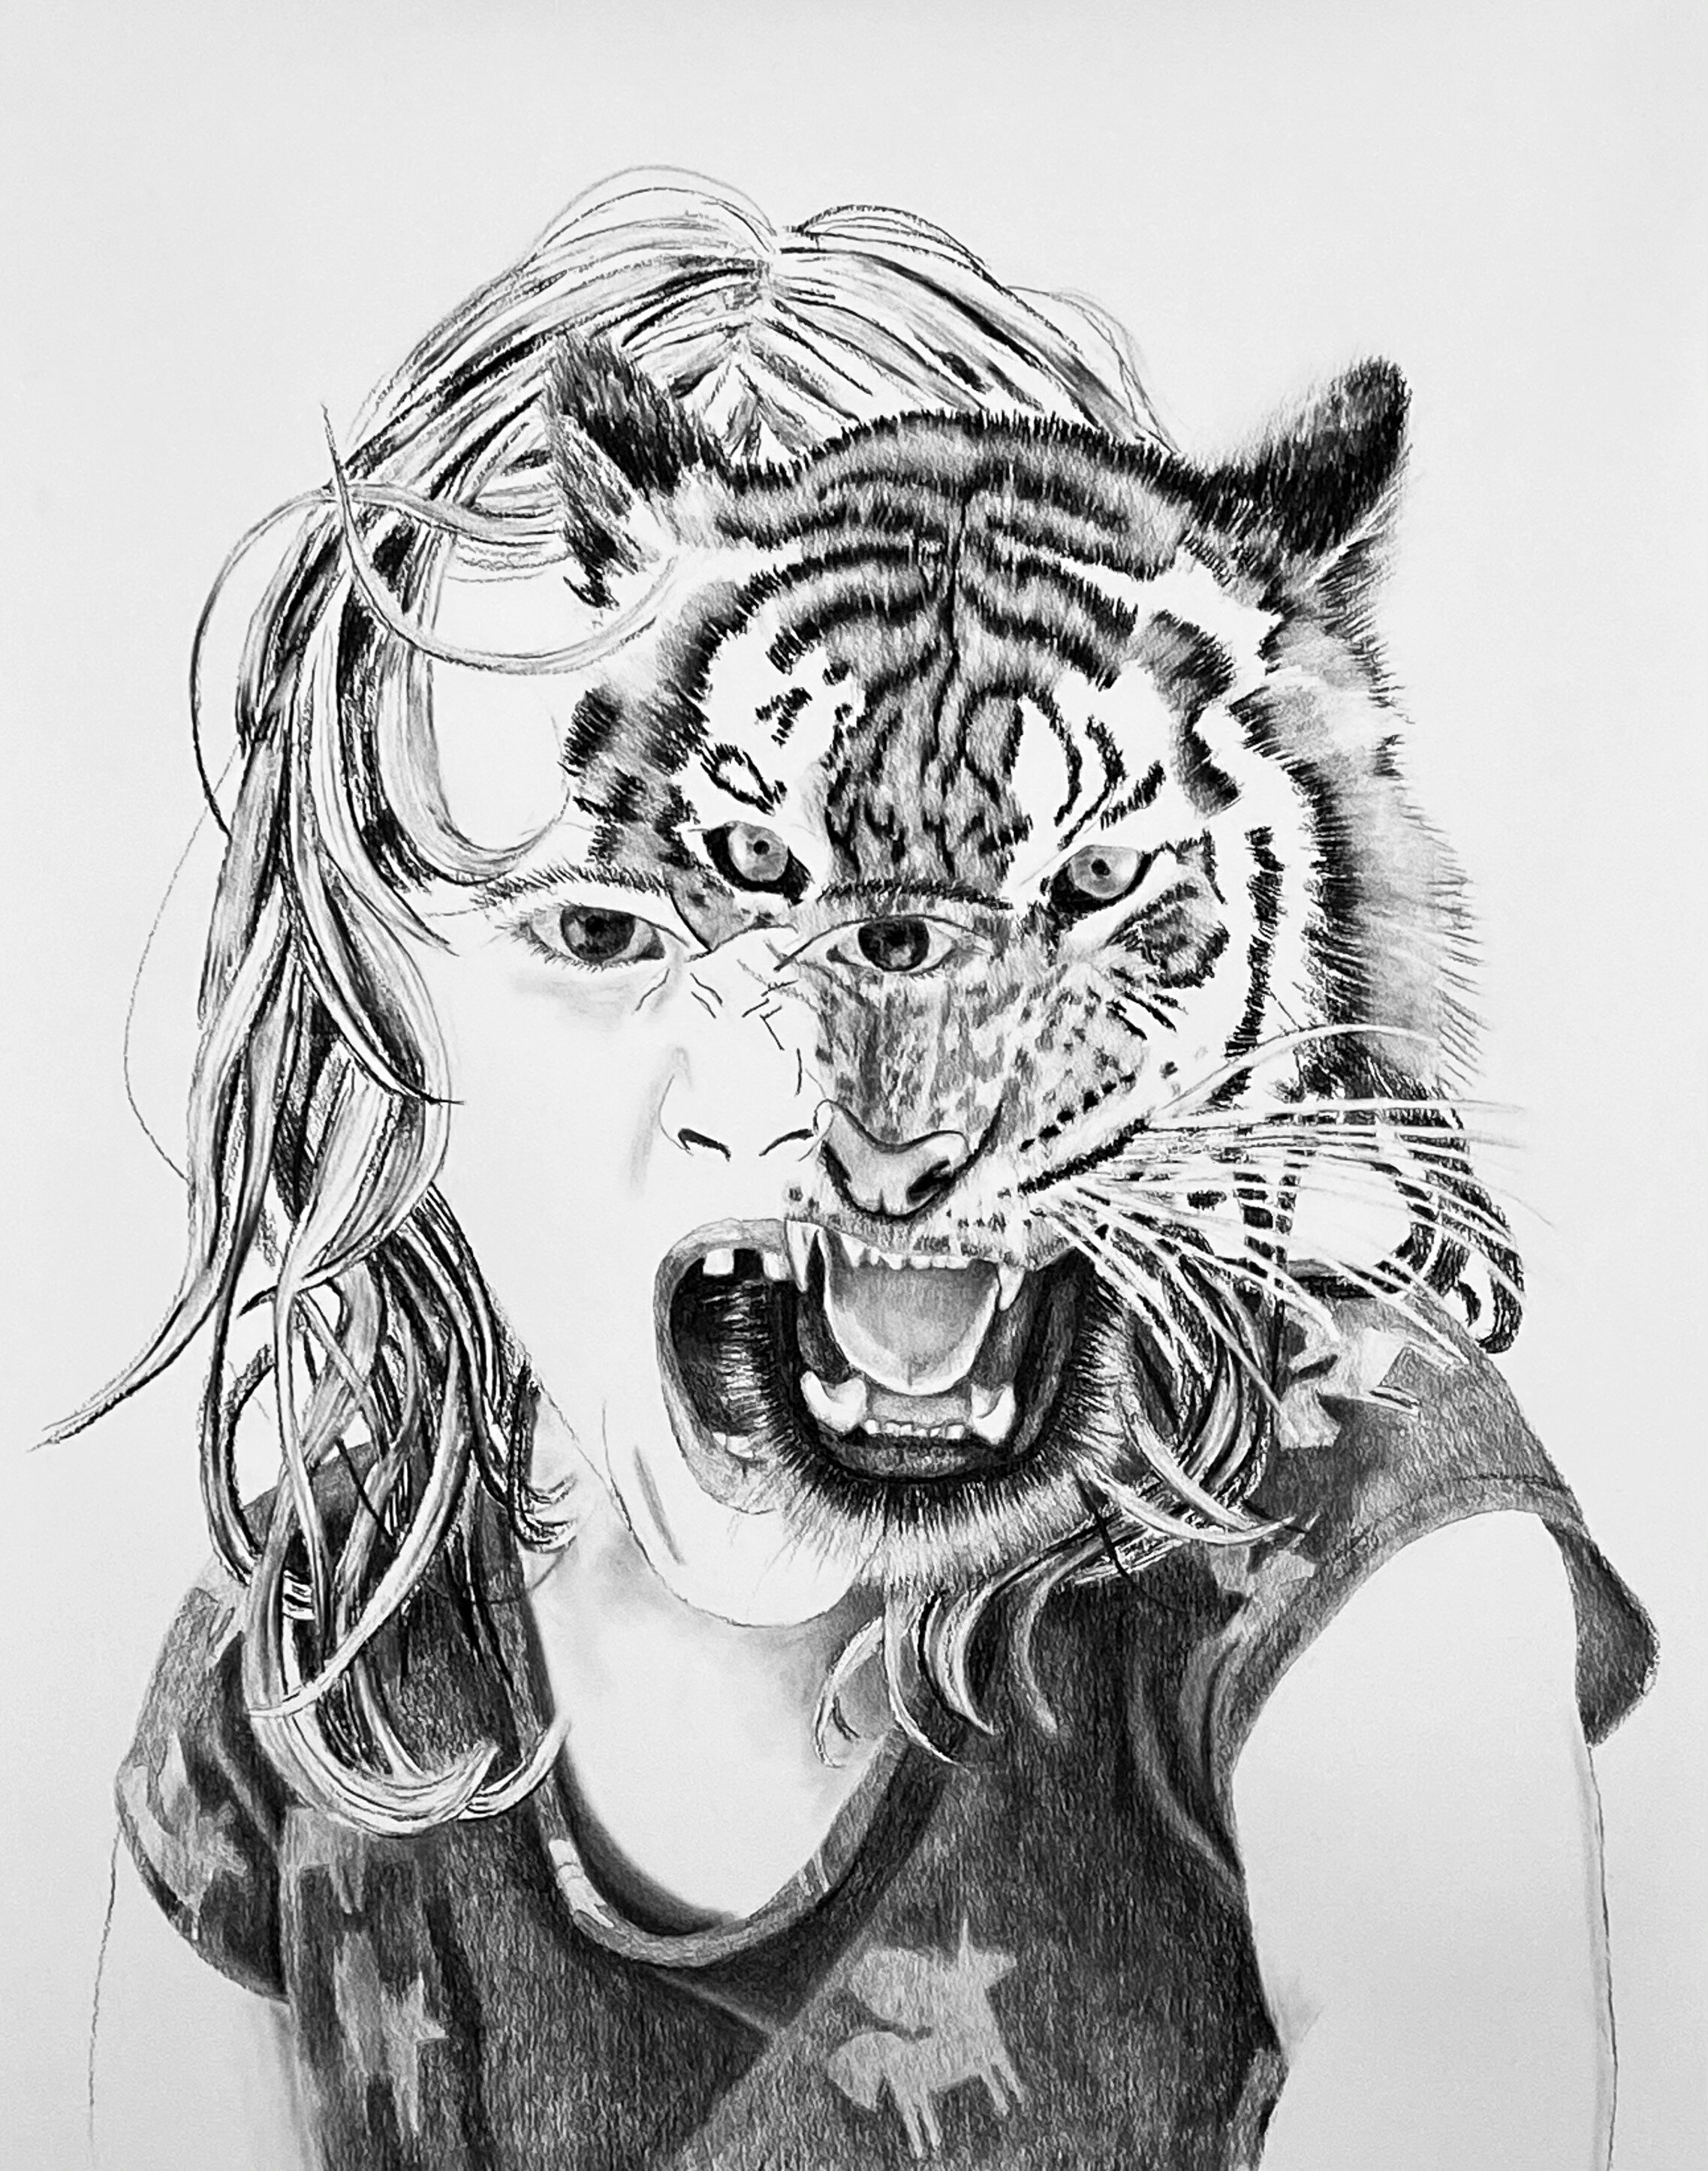   Untitled I (Kid Monster) , charcoal on paper, 30”x 38”, 2020 